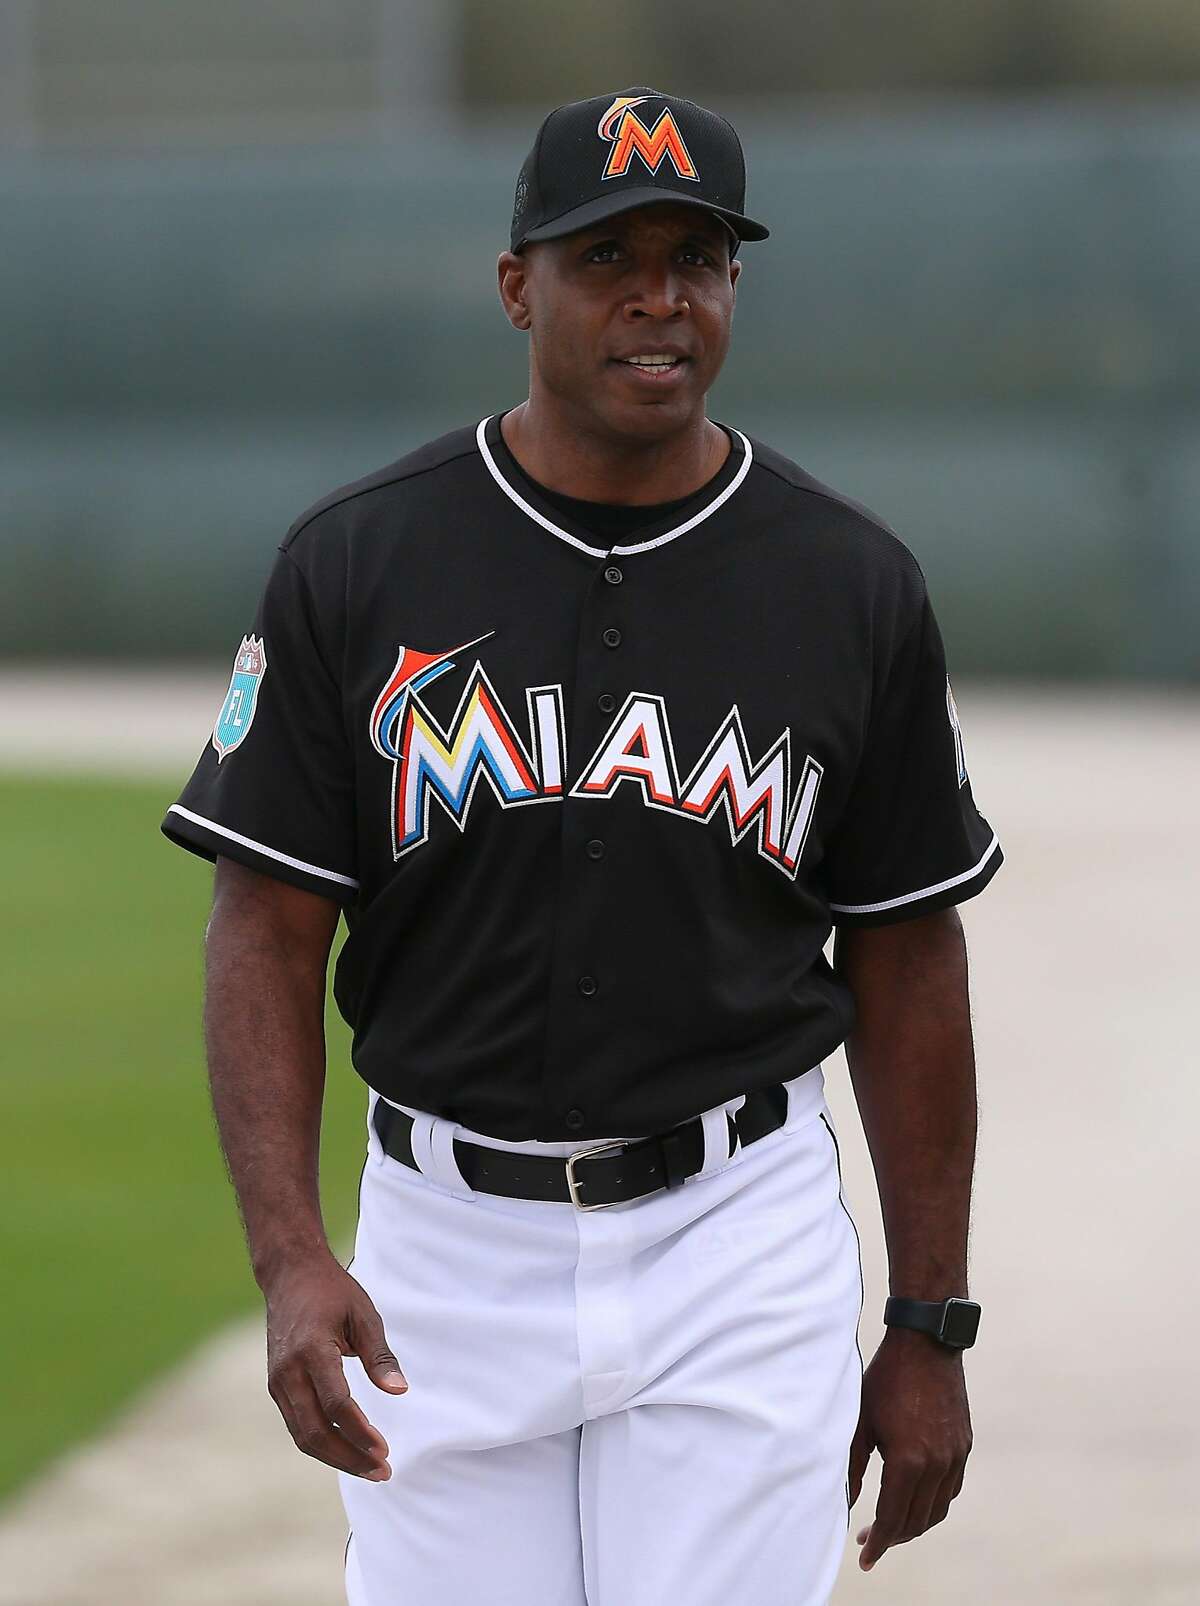 Barry Bonds ready to teach Marlins' hitters